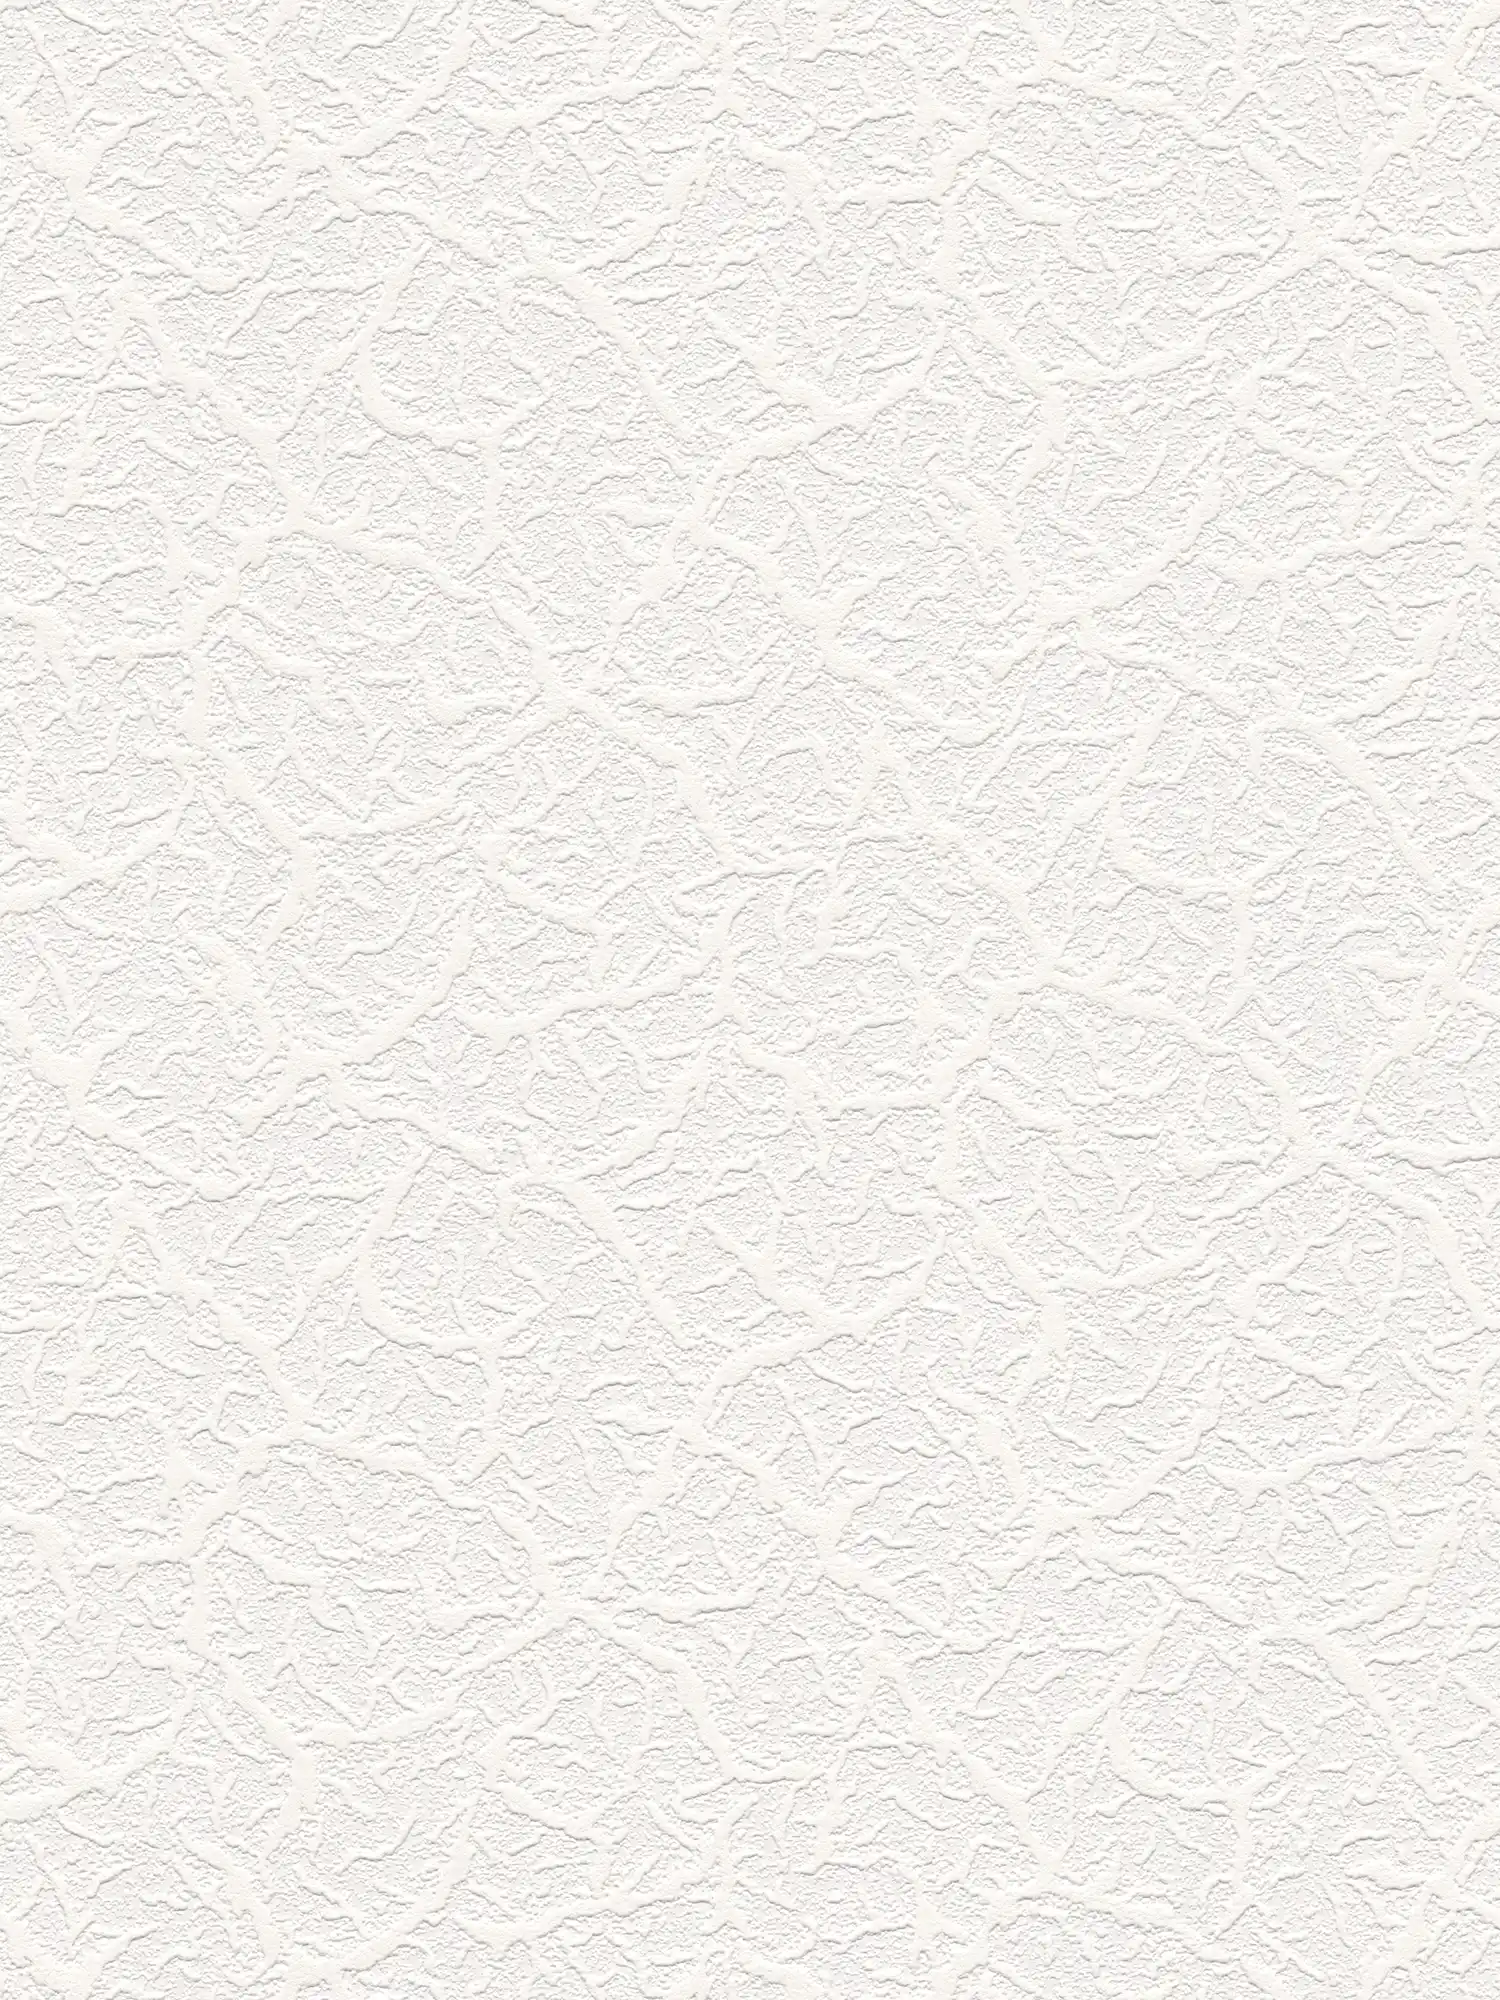 Paper wallpaper white with natural texture design
